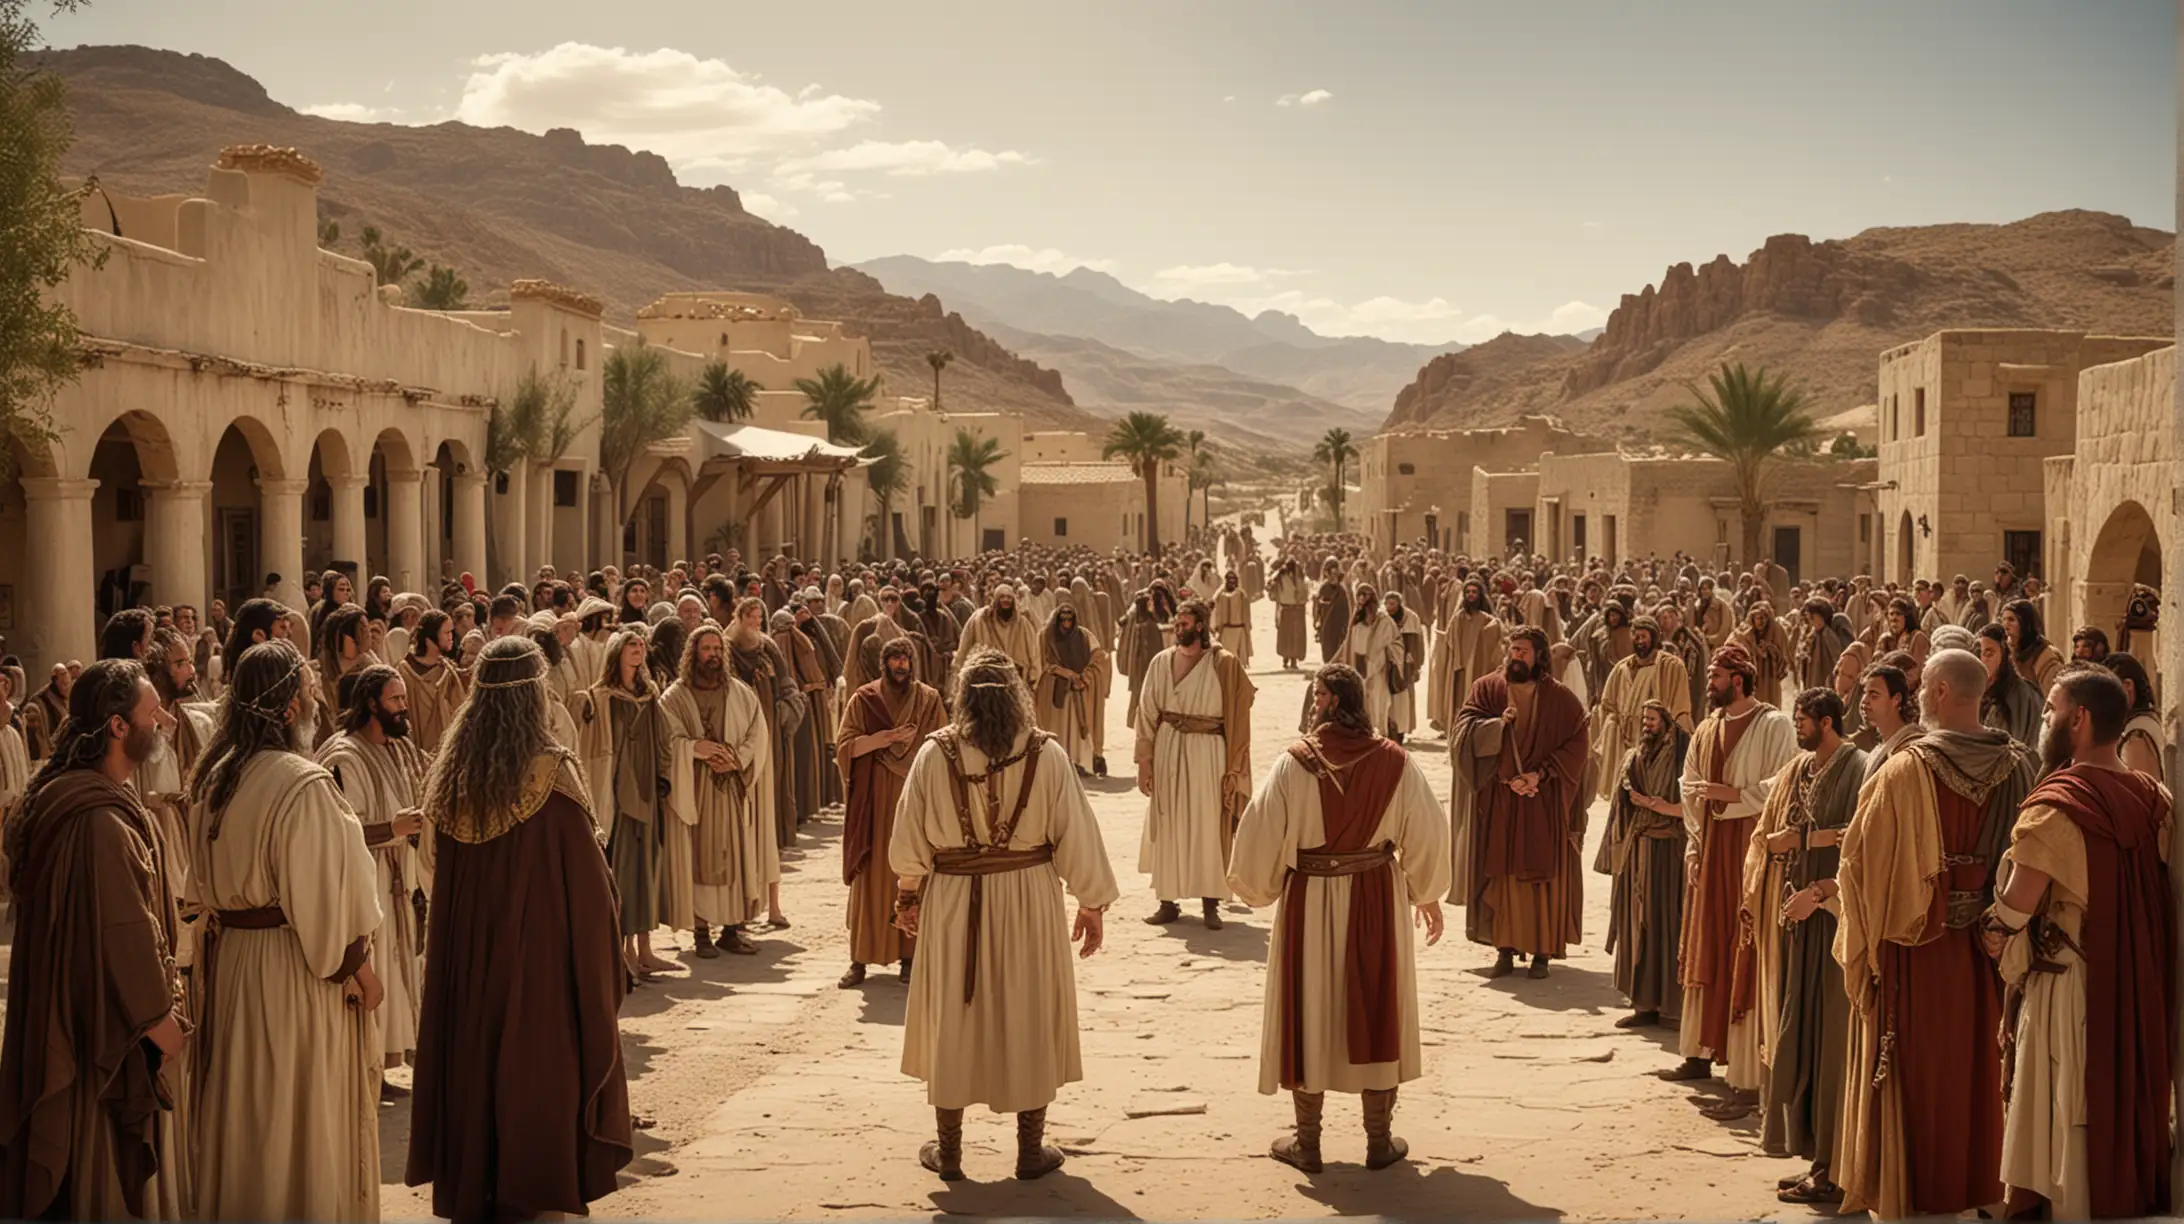 King David Speaking with Levitical Priests in a Desert Town